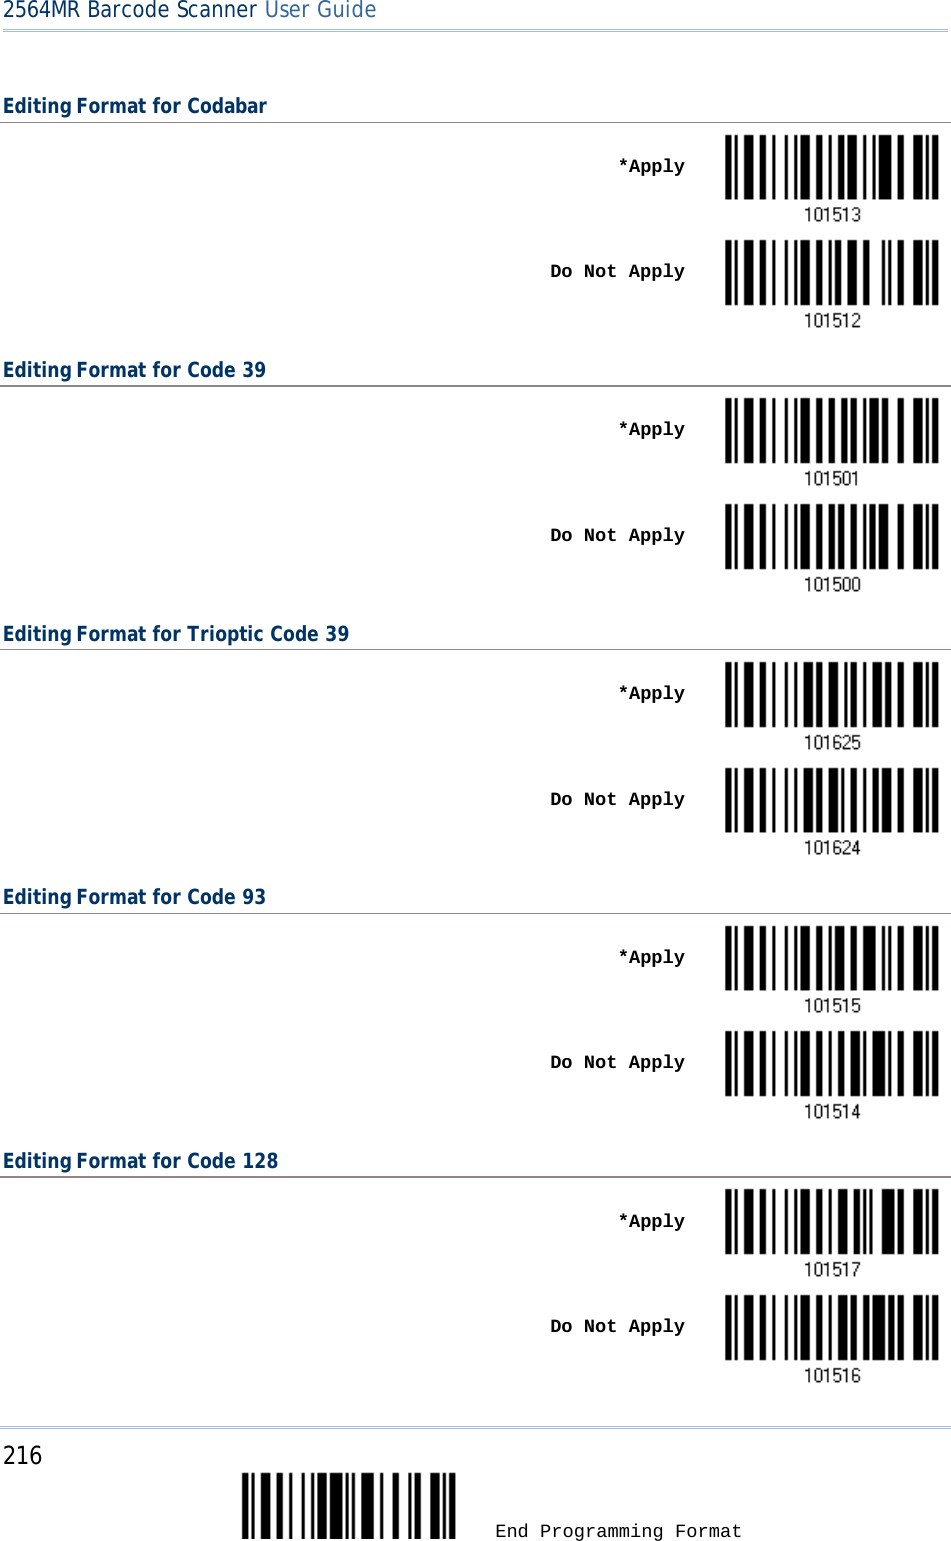 2564MR Barcode Scanner User Guide  Editing Format for Codabar    *Apply     Do Not Apply  Editing Format for Code 39    *Apply     Do Not Apply  Editing Format for Trioptic Code 39    *Apply     Do Not Apply  Editing Format for Code 93    *Apply     Do Not Apply  Editing Format for Code 128    *Apply     Do Not Apply  216  End Programming Format 